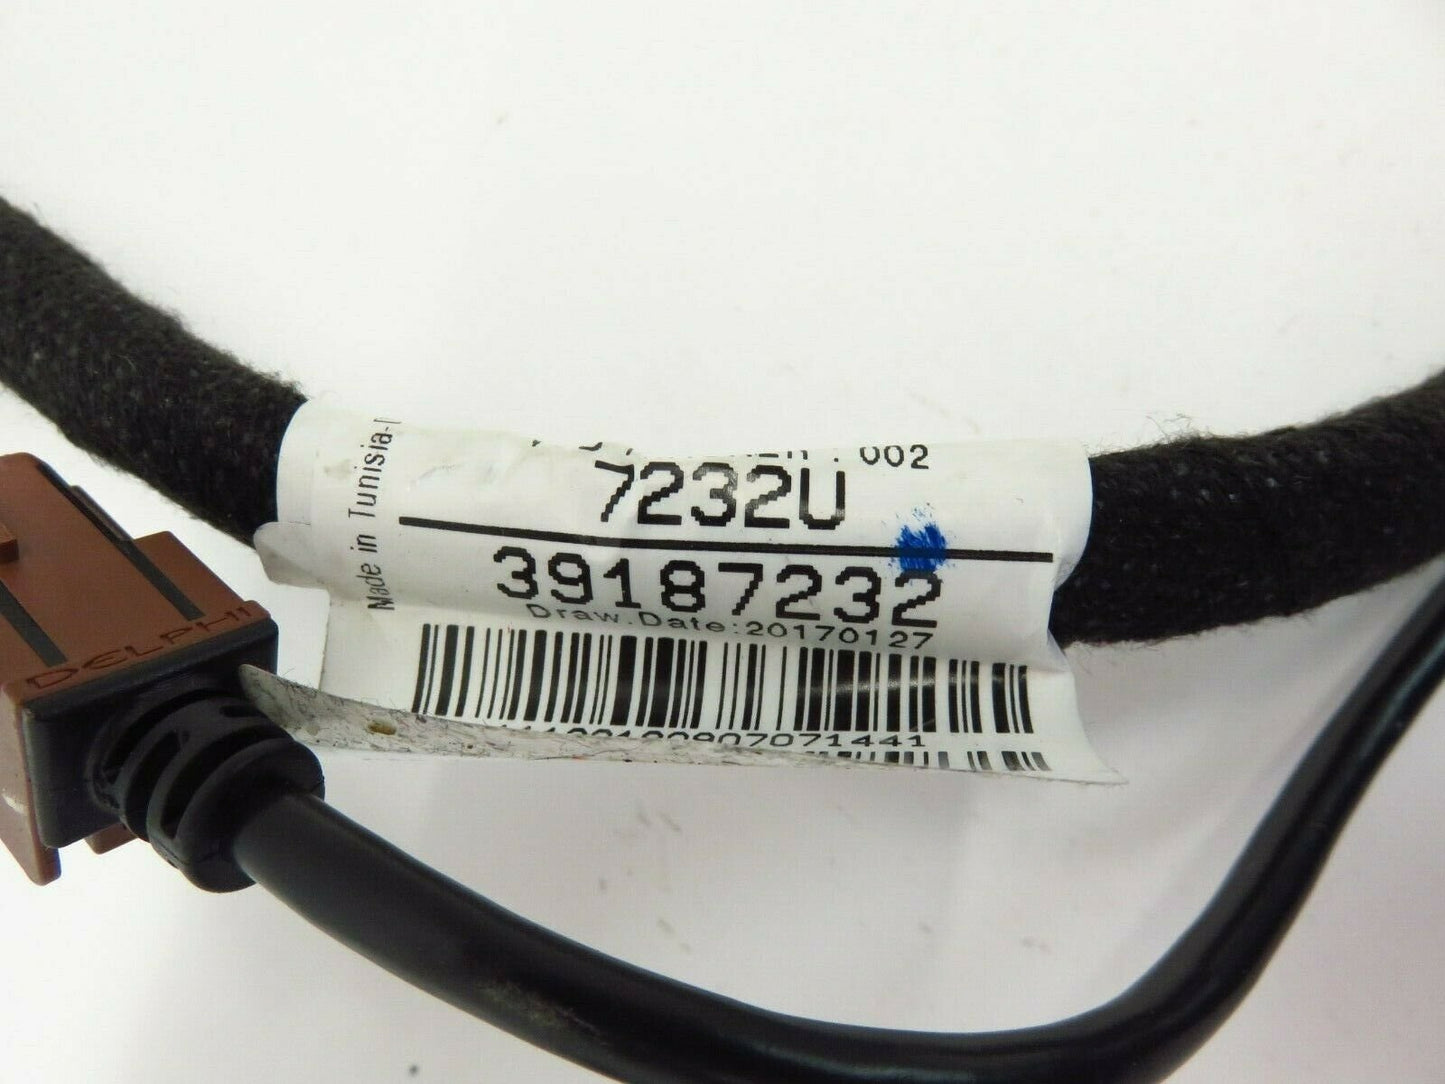 2019 Buick Regal TourX Center Console Wiring Harness 39187232 Wire OEM 19